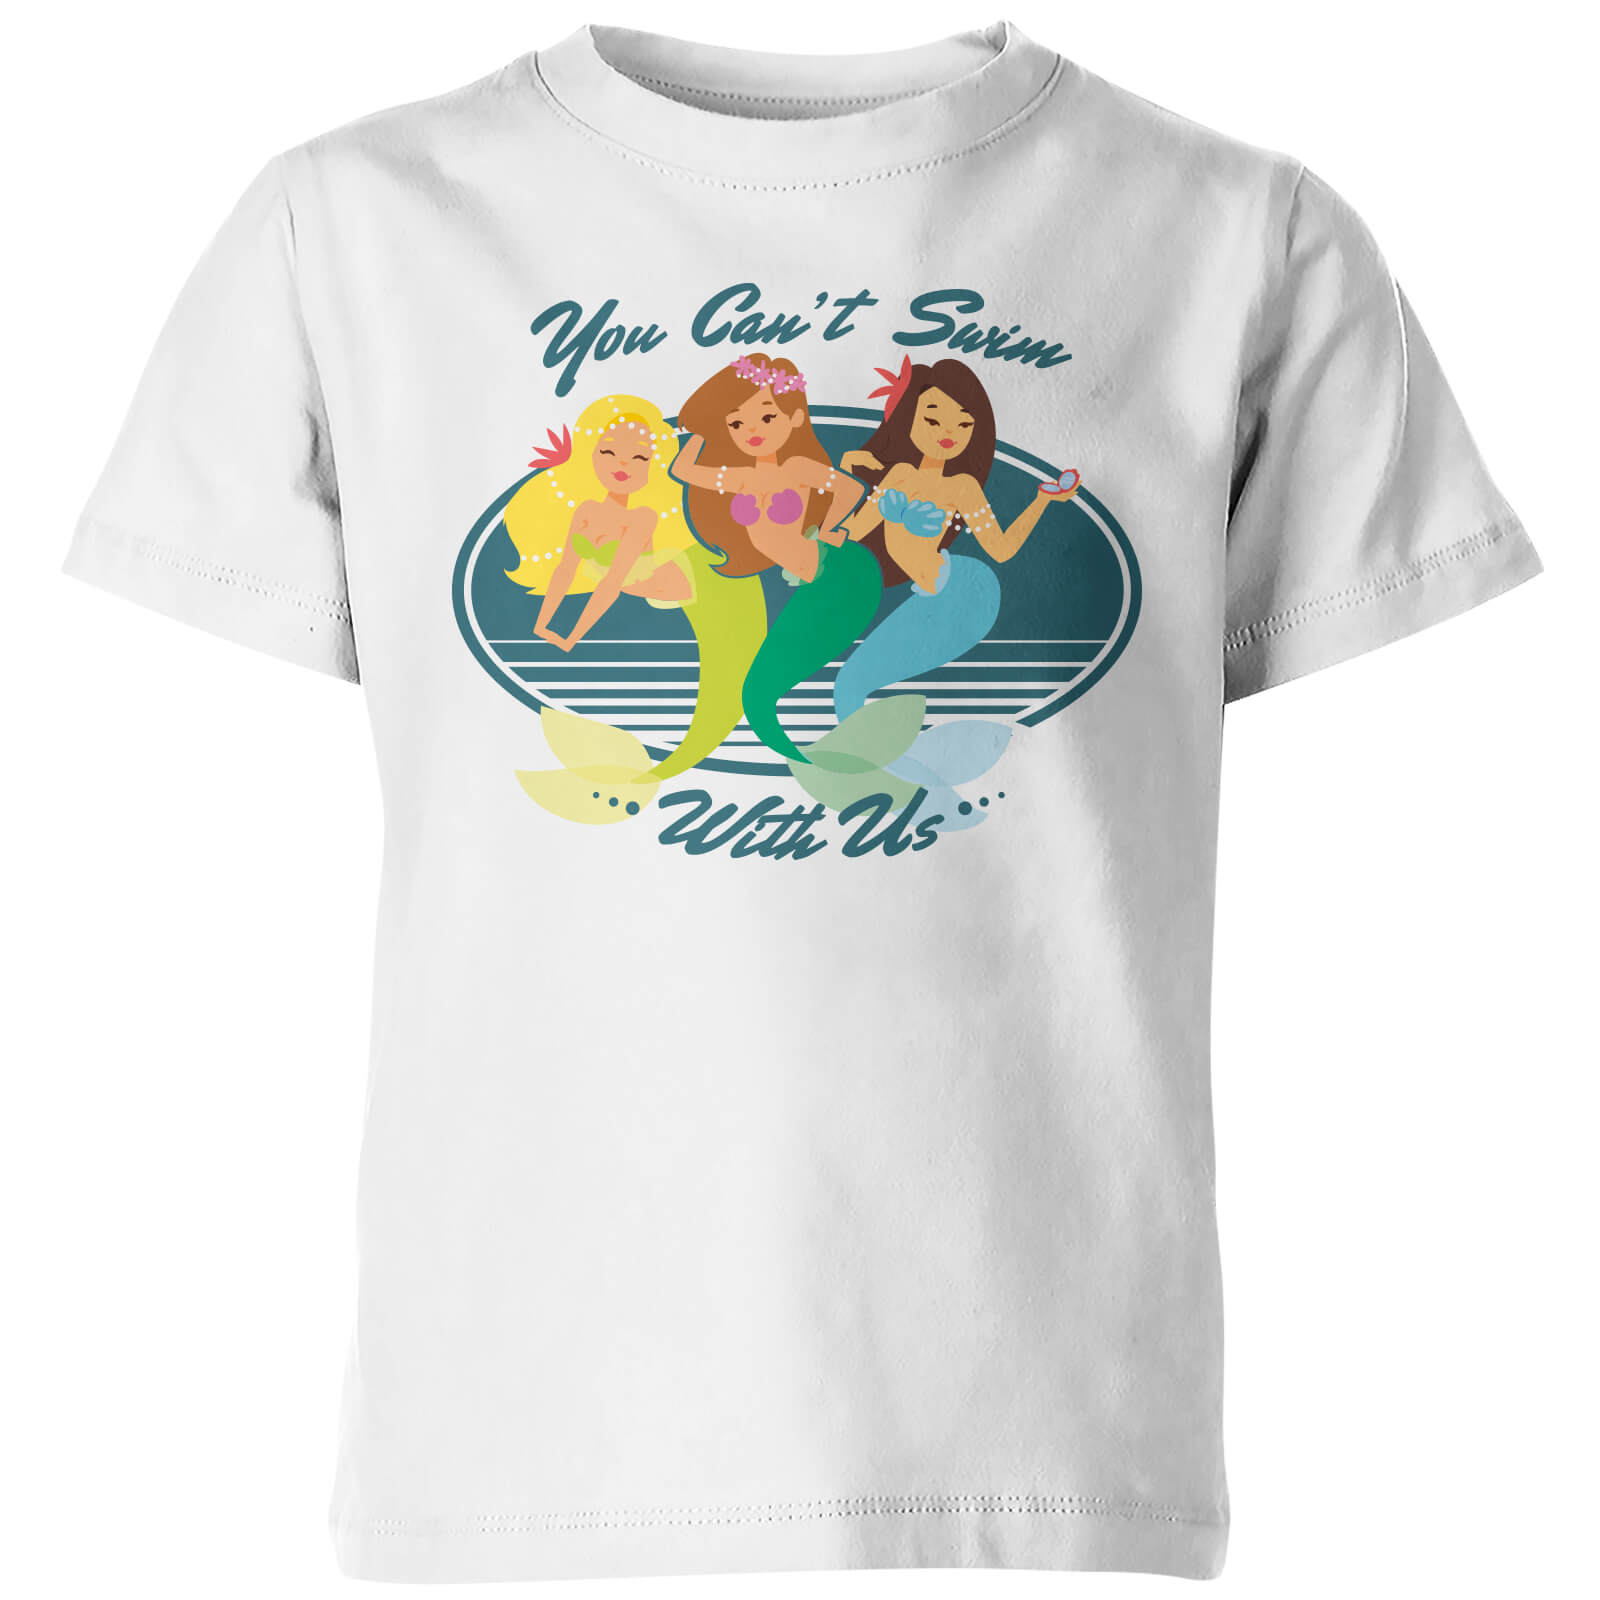 You Can't Swim With Us Kids' White T-Shirt - 7-8yrs - White